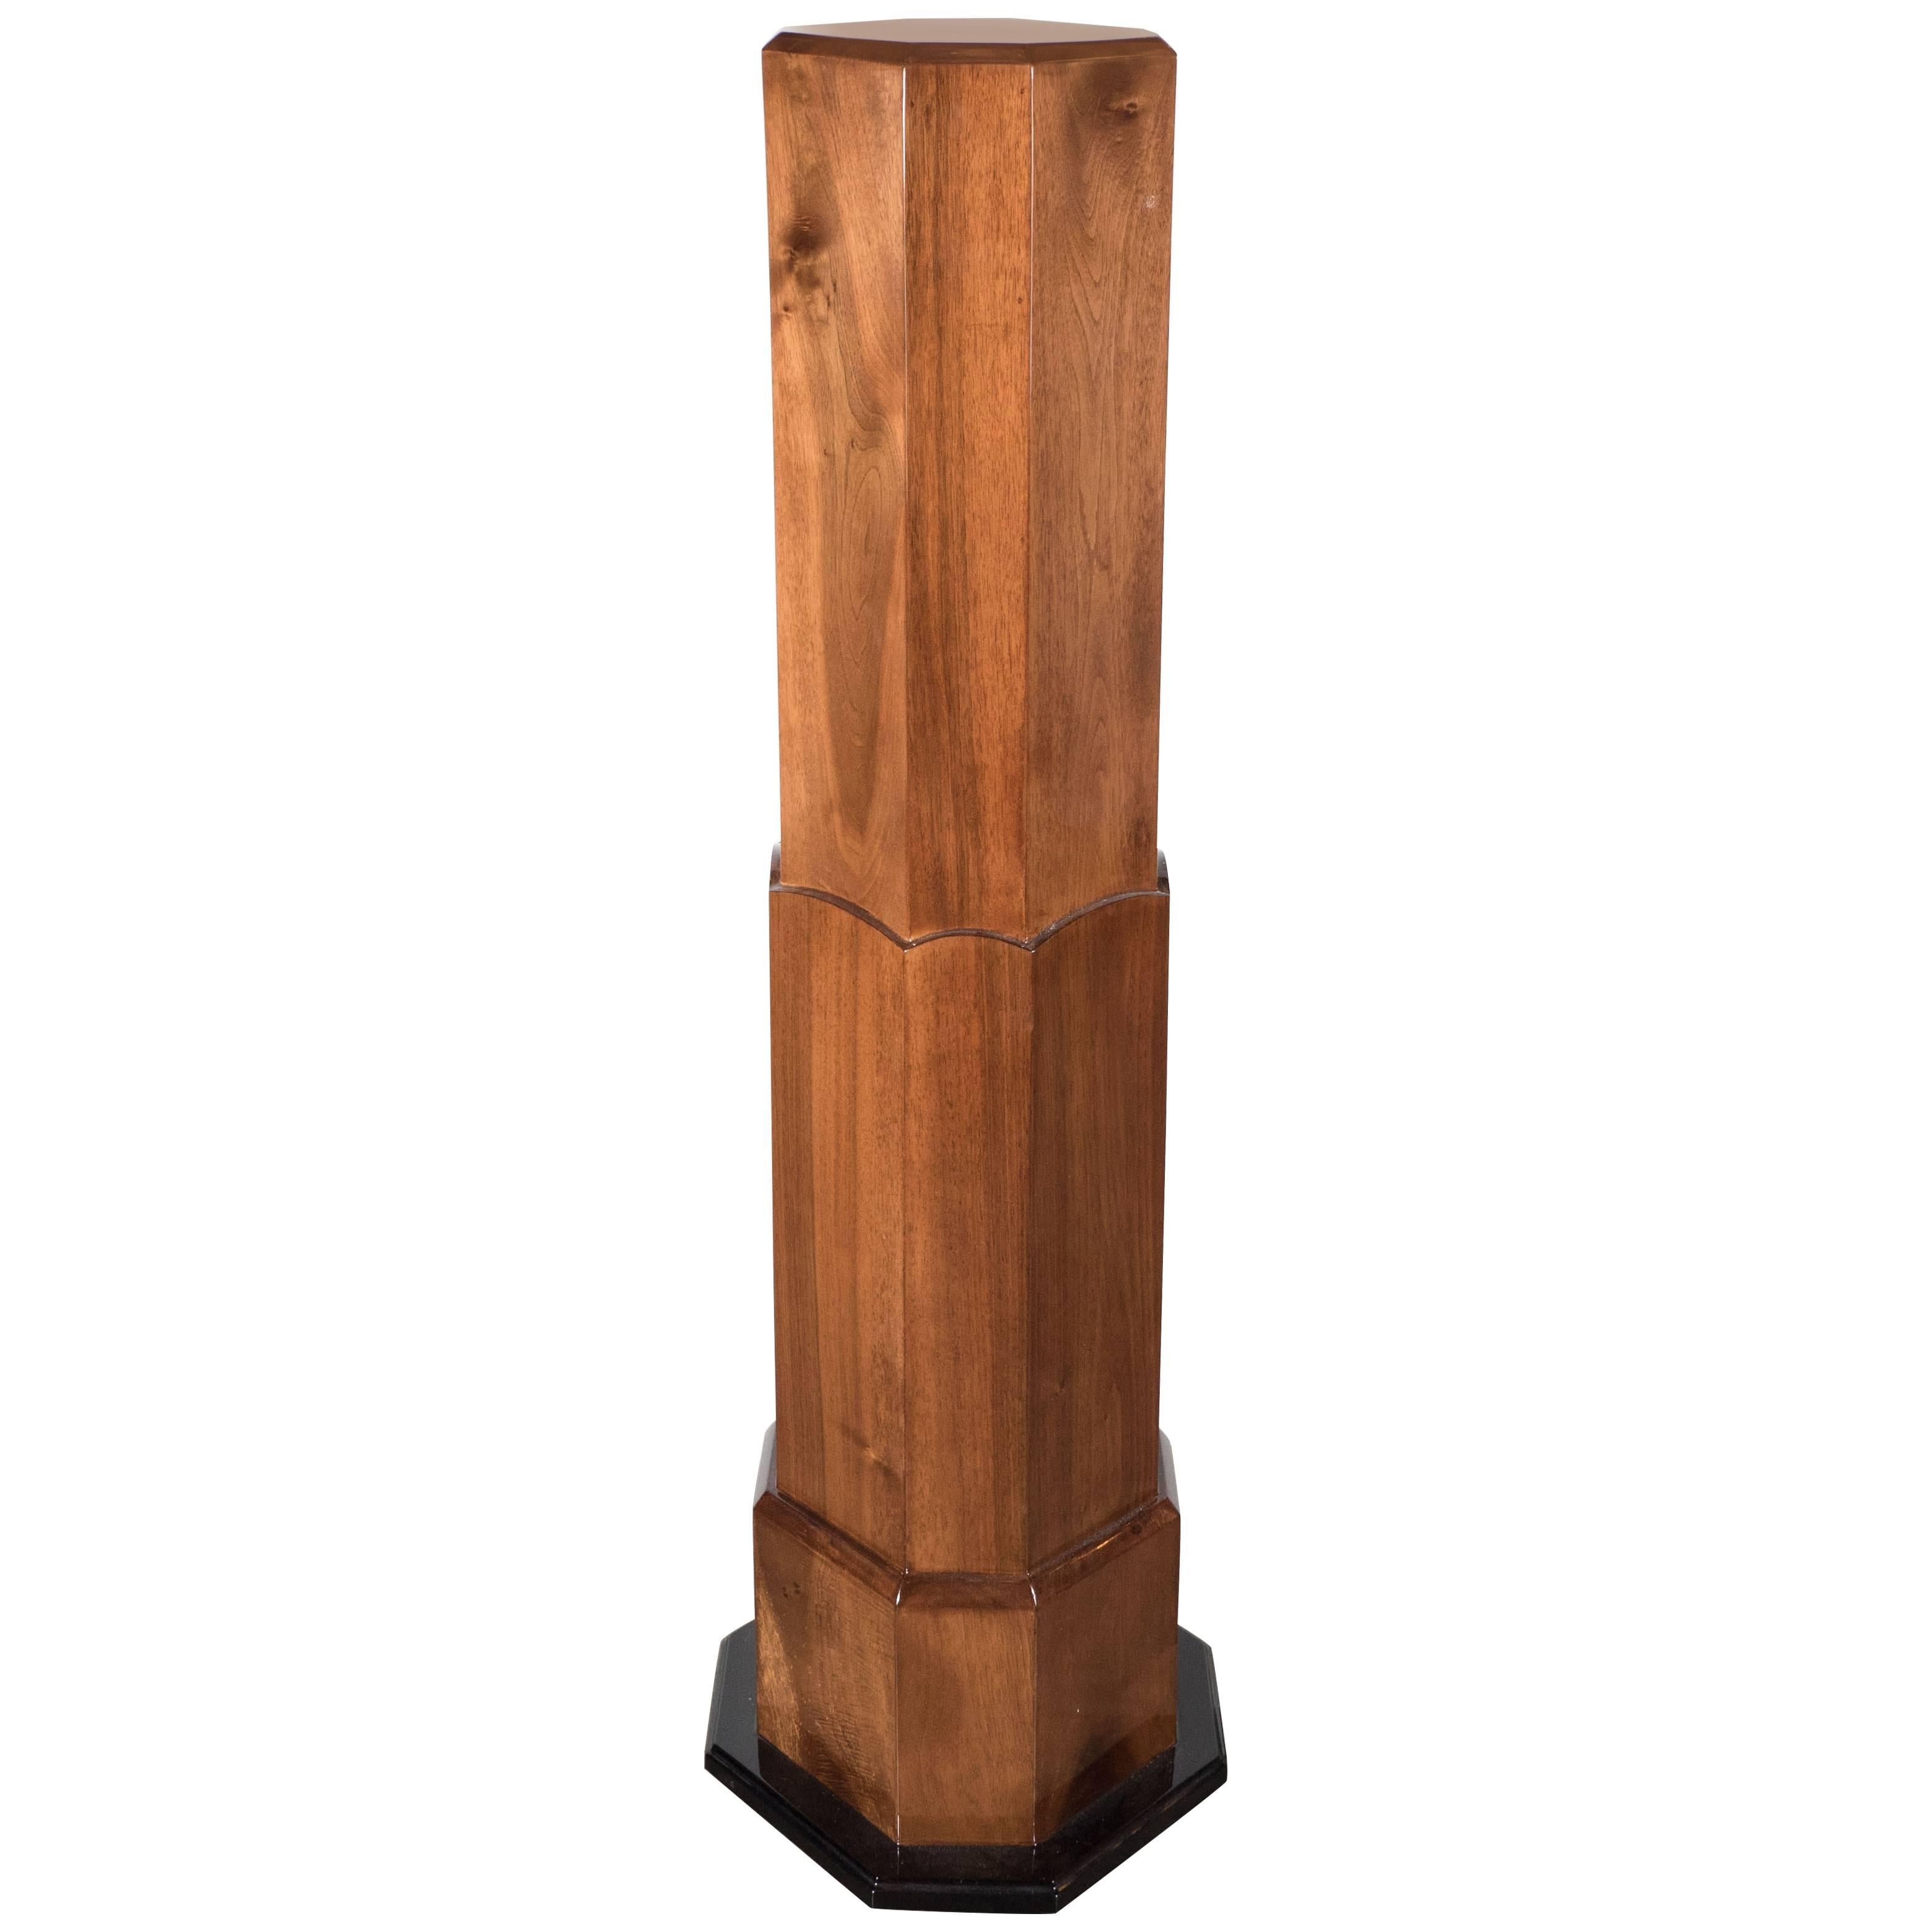 Art Deco Skyscraper-Style Pedestal in Bookmatched Walnut with Lacquer Accents